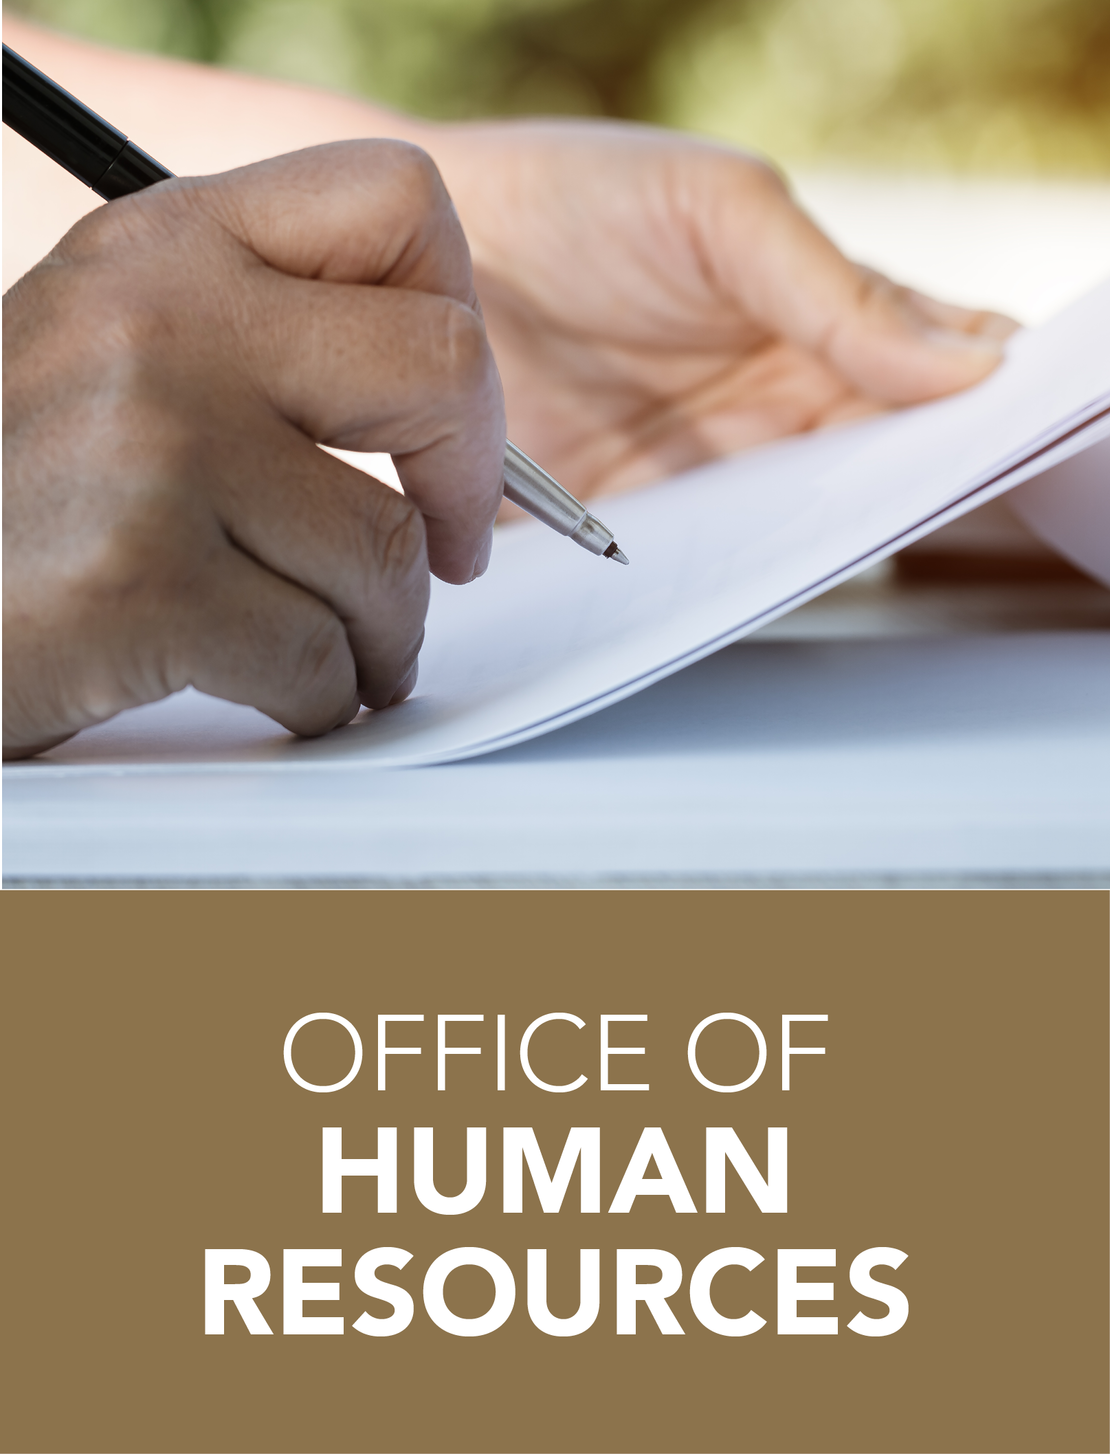 OFFICE OF HUMAN RESOURCES LINK